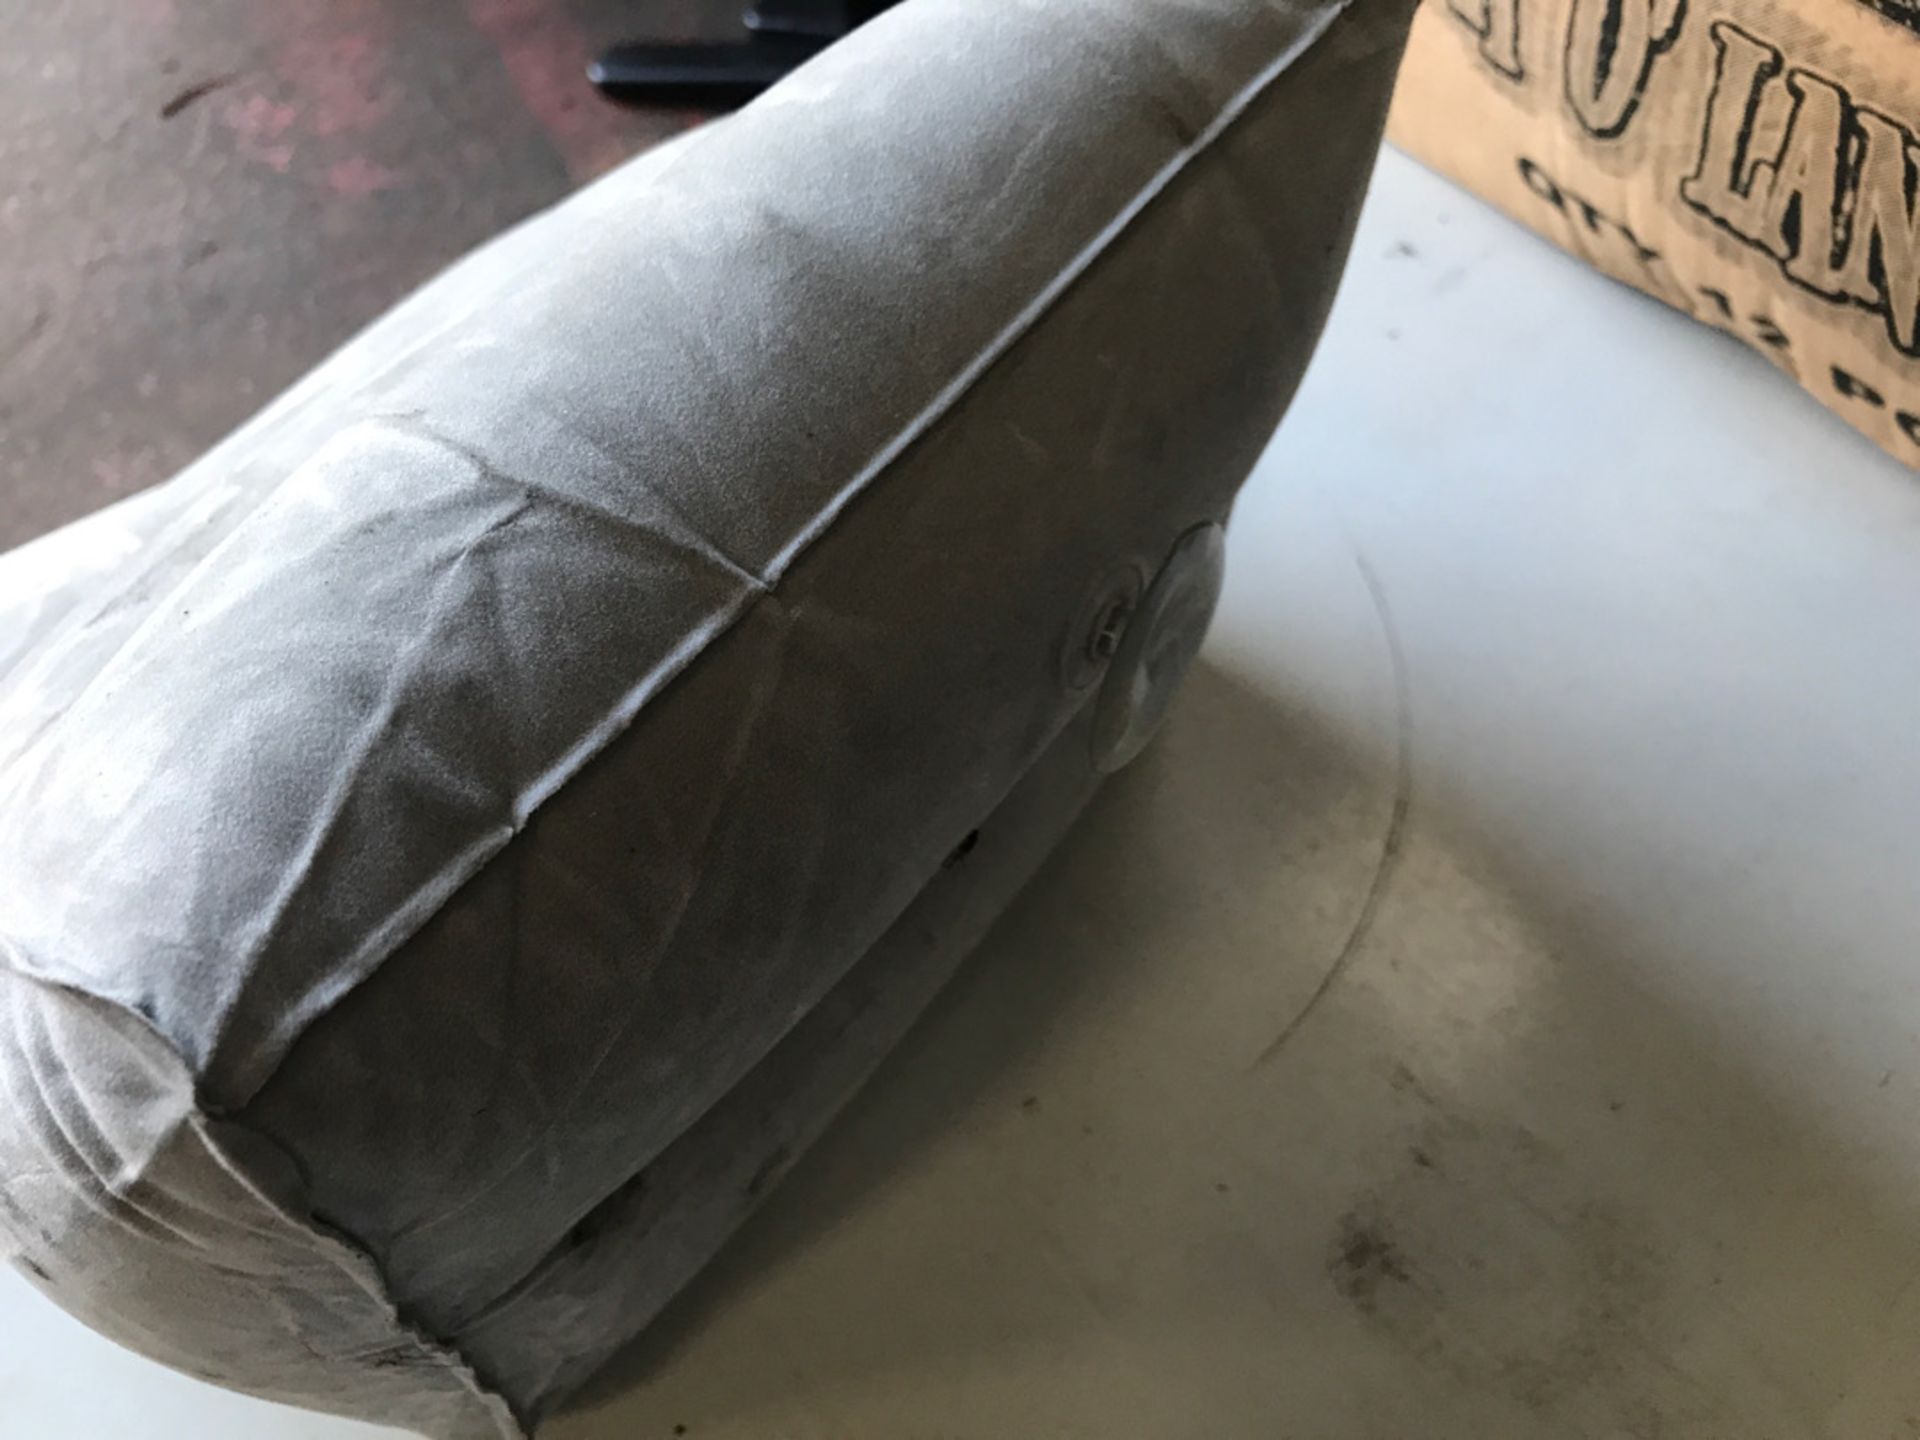 Grey inflatable head cushion to be used in a car - Image 2 of 6